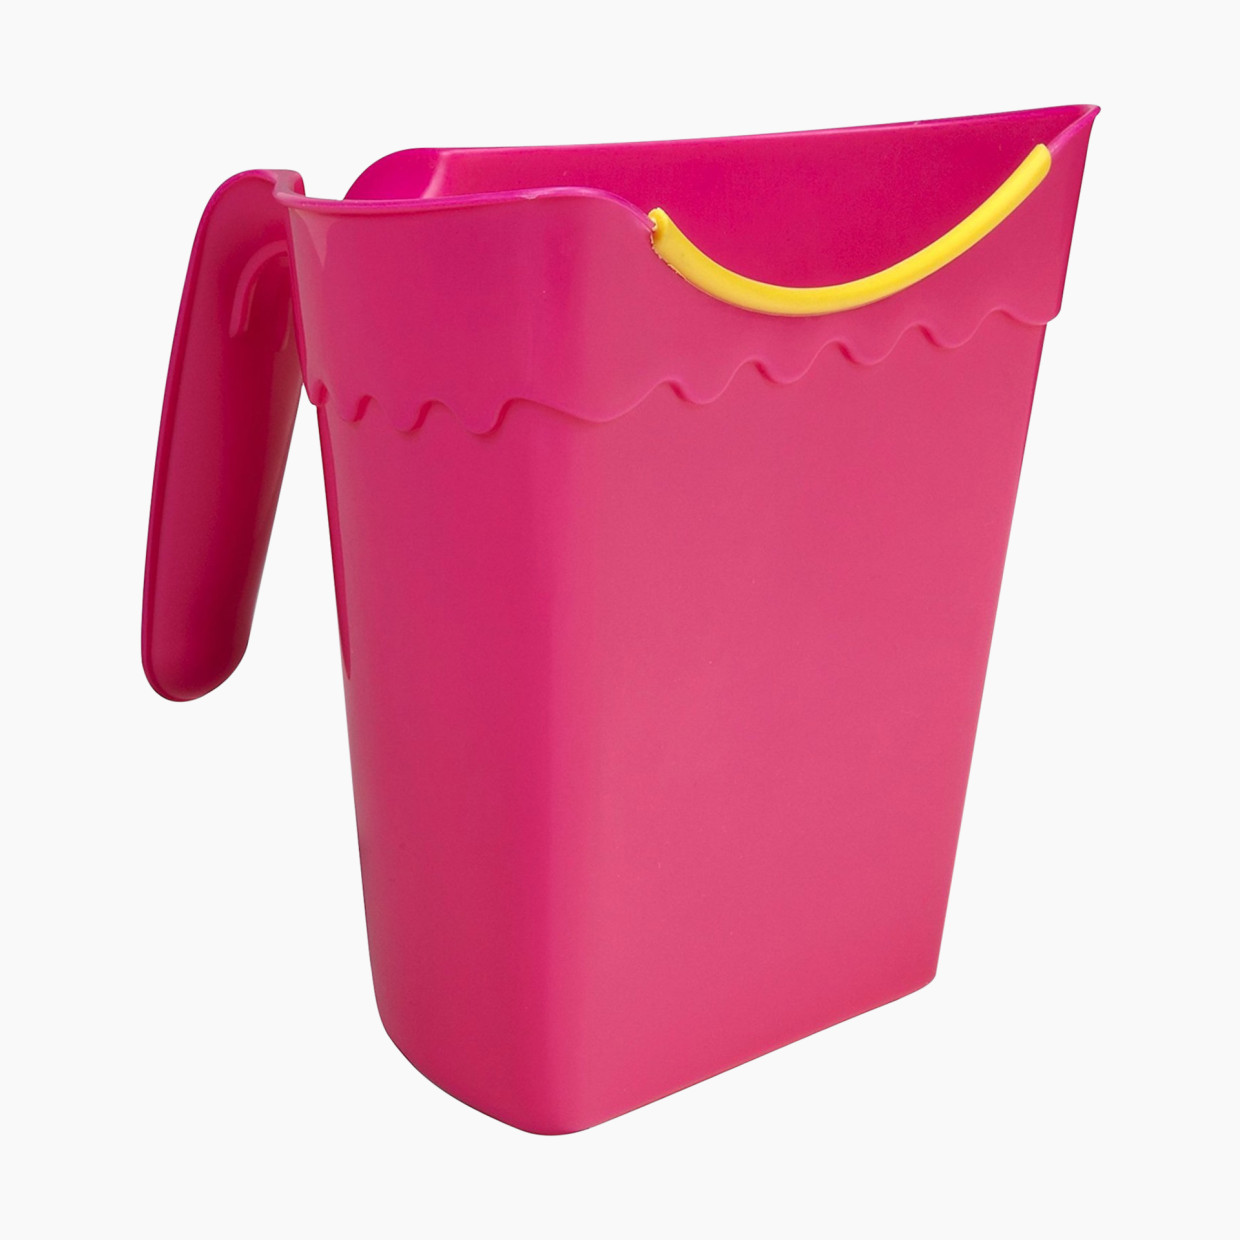 Safety 1st No Tears Rinse Cup - Pink.